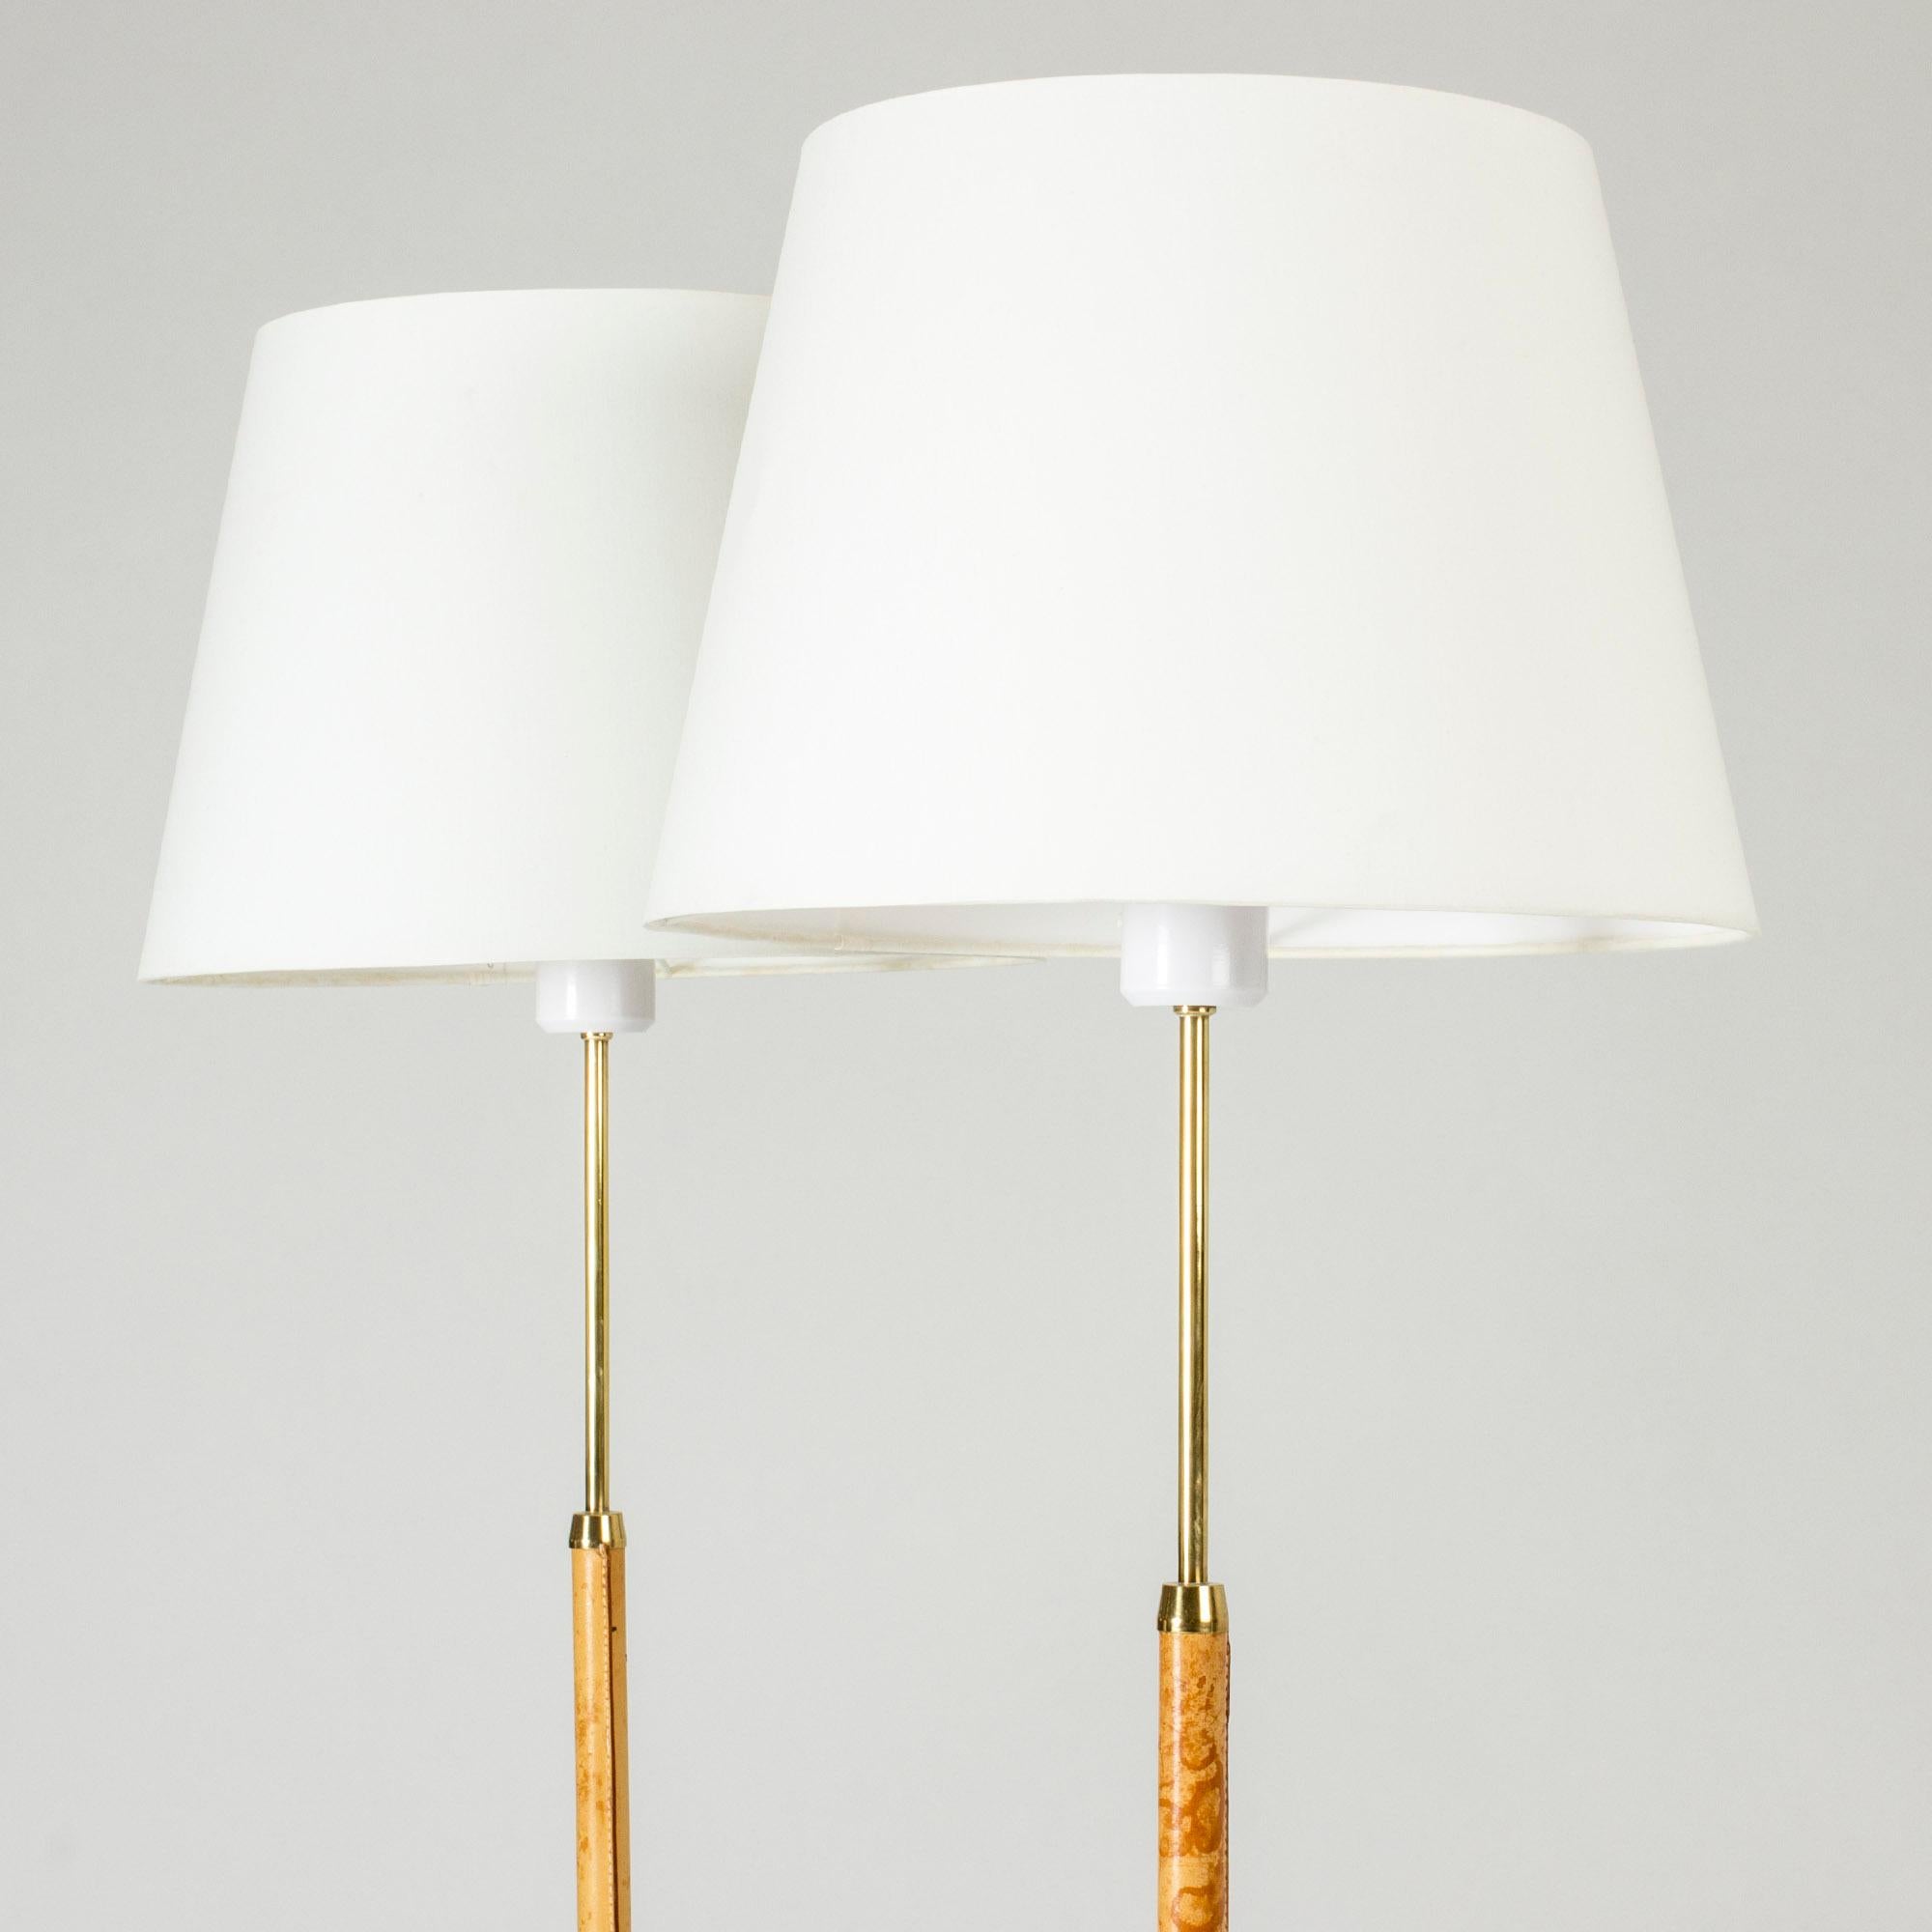 Swedish Pair of Floor Lamps from Falkenbergs Belysning, Sweden, 1950s